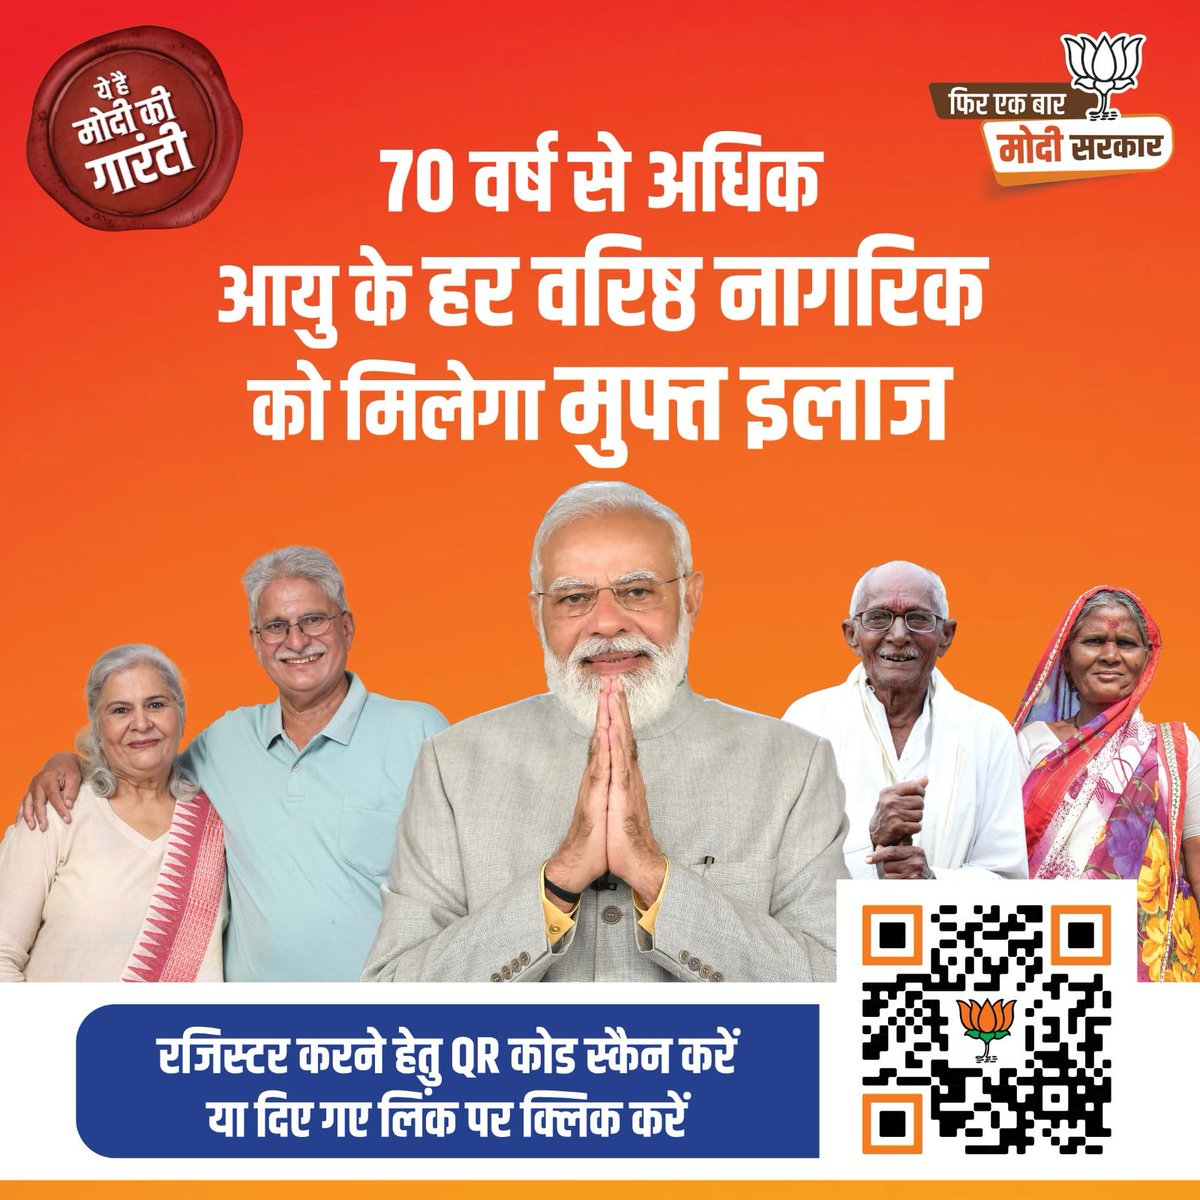 Every senior citizen above the age of 70 will get free treatment. #ModiKiGuarantee